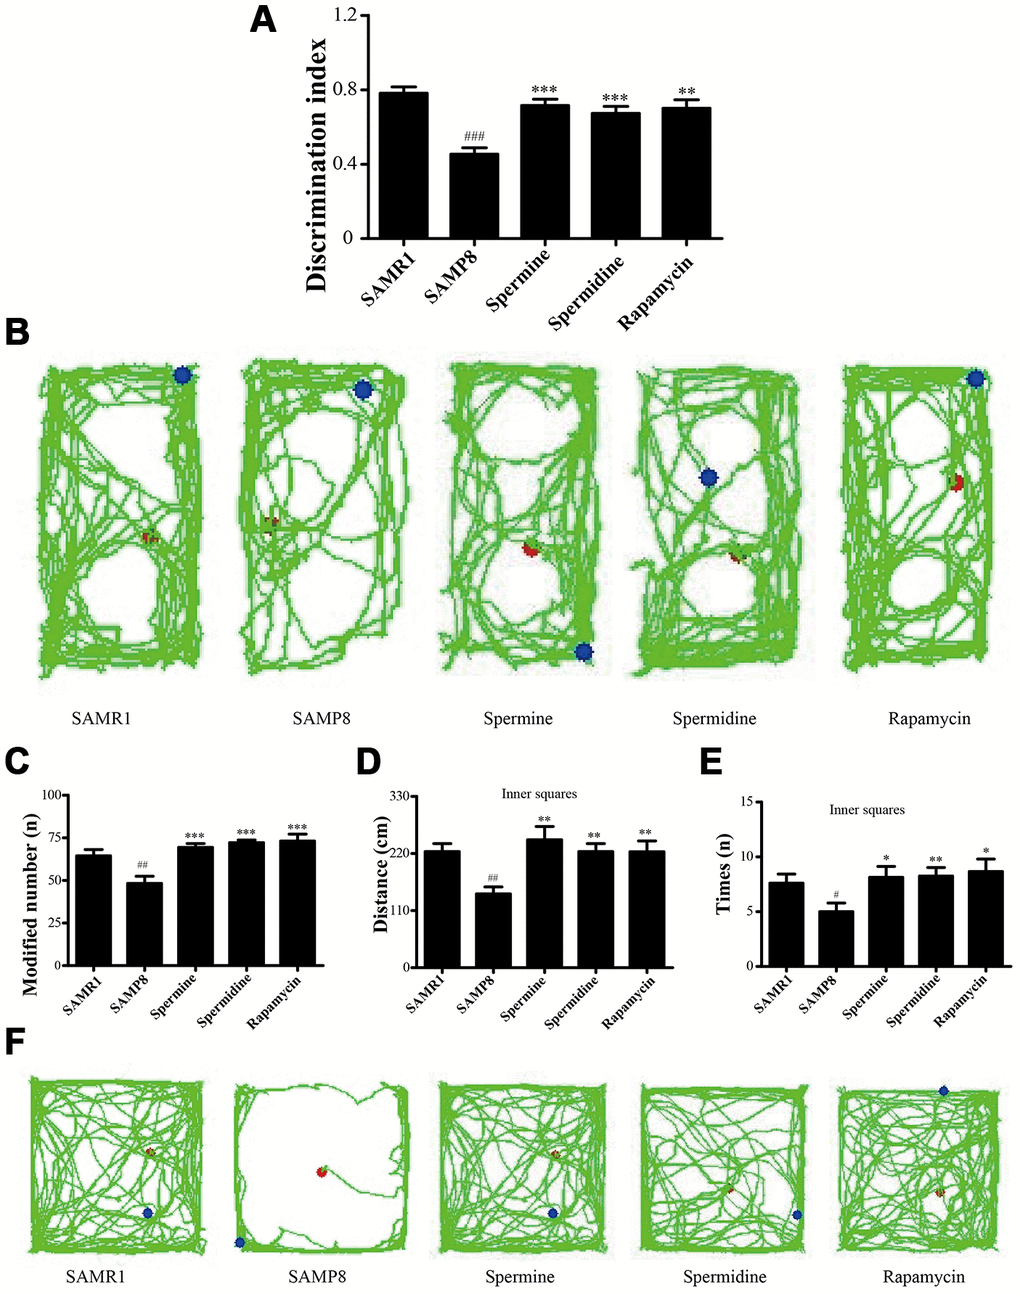 Spermidine and spermine ameliorates cognitive dysfunction in behavioral test in SAMP8. (A, B) Discrimination index and paths in novel object recognition. (C) The modified number in open field test. (D) The distance of inner squares in open field test. (E) Time spent in the inner squares in open field test. (F) The paths of respective groups. Data represent mean ± SEM (n = 10 per group). #P ##P ###P P P P 